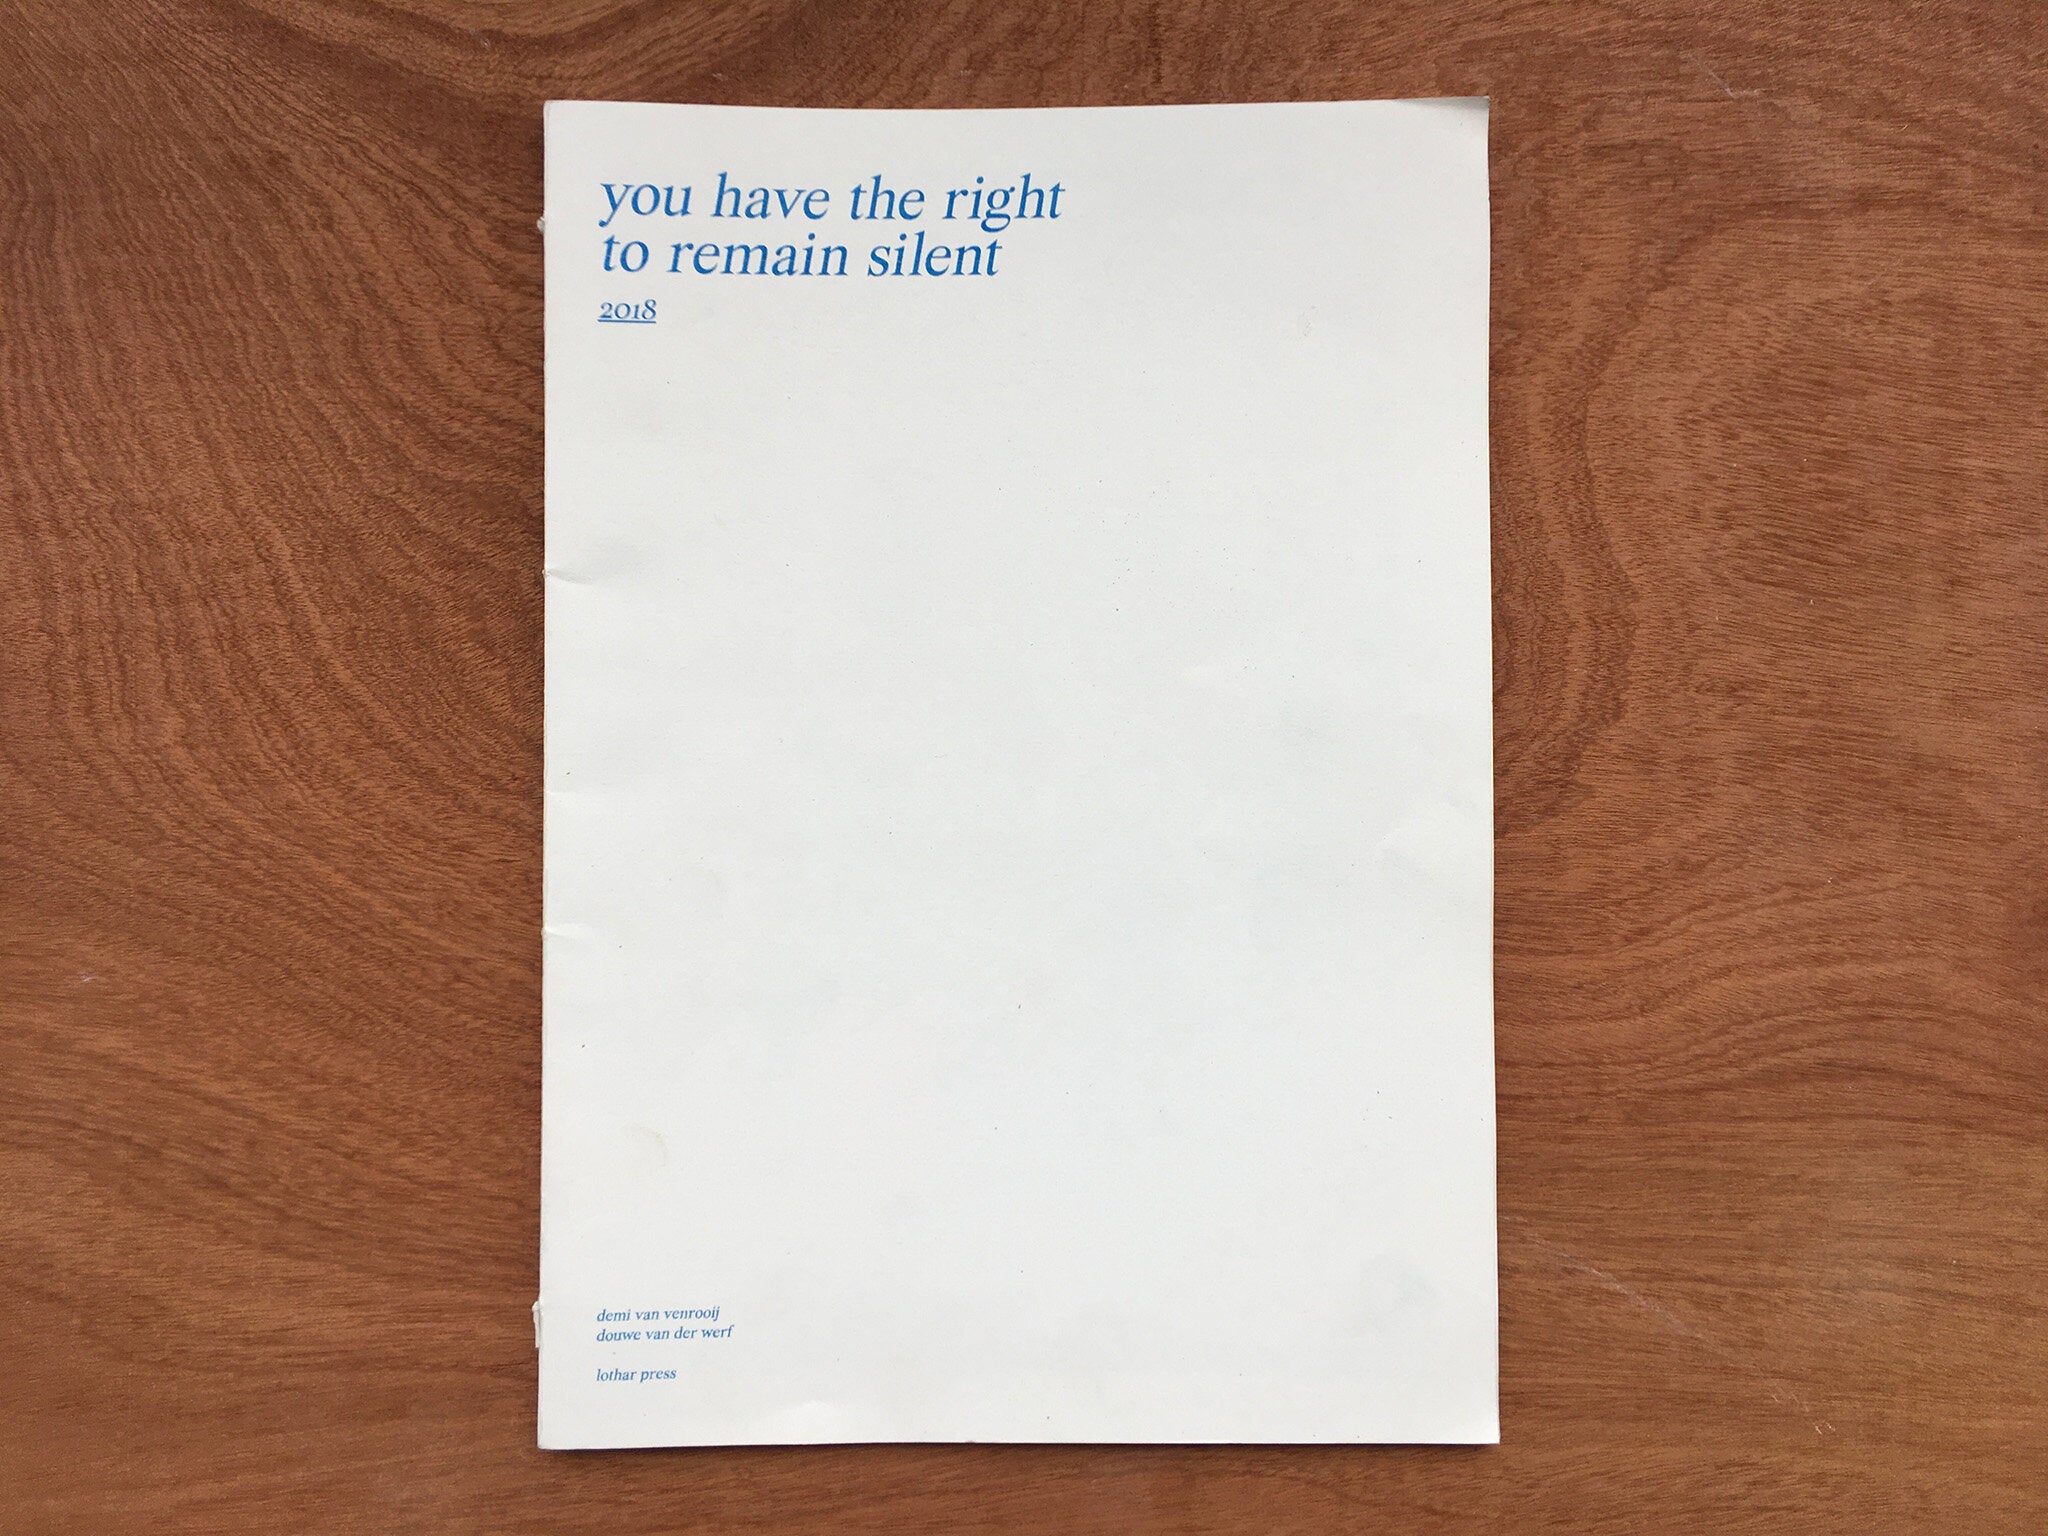 YOU HAVE THE RIGHT TO REMAIN SILENT by Demi van Venrooij and Douwe van der Werf